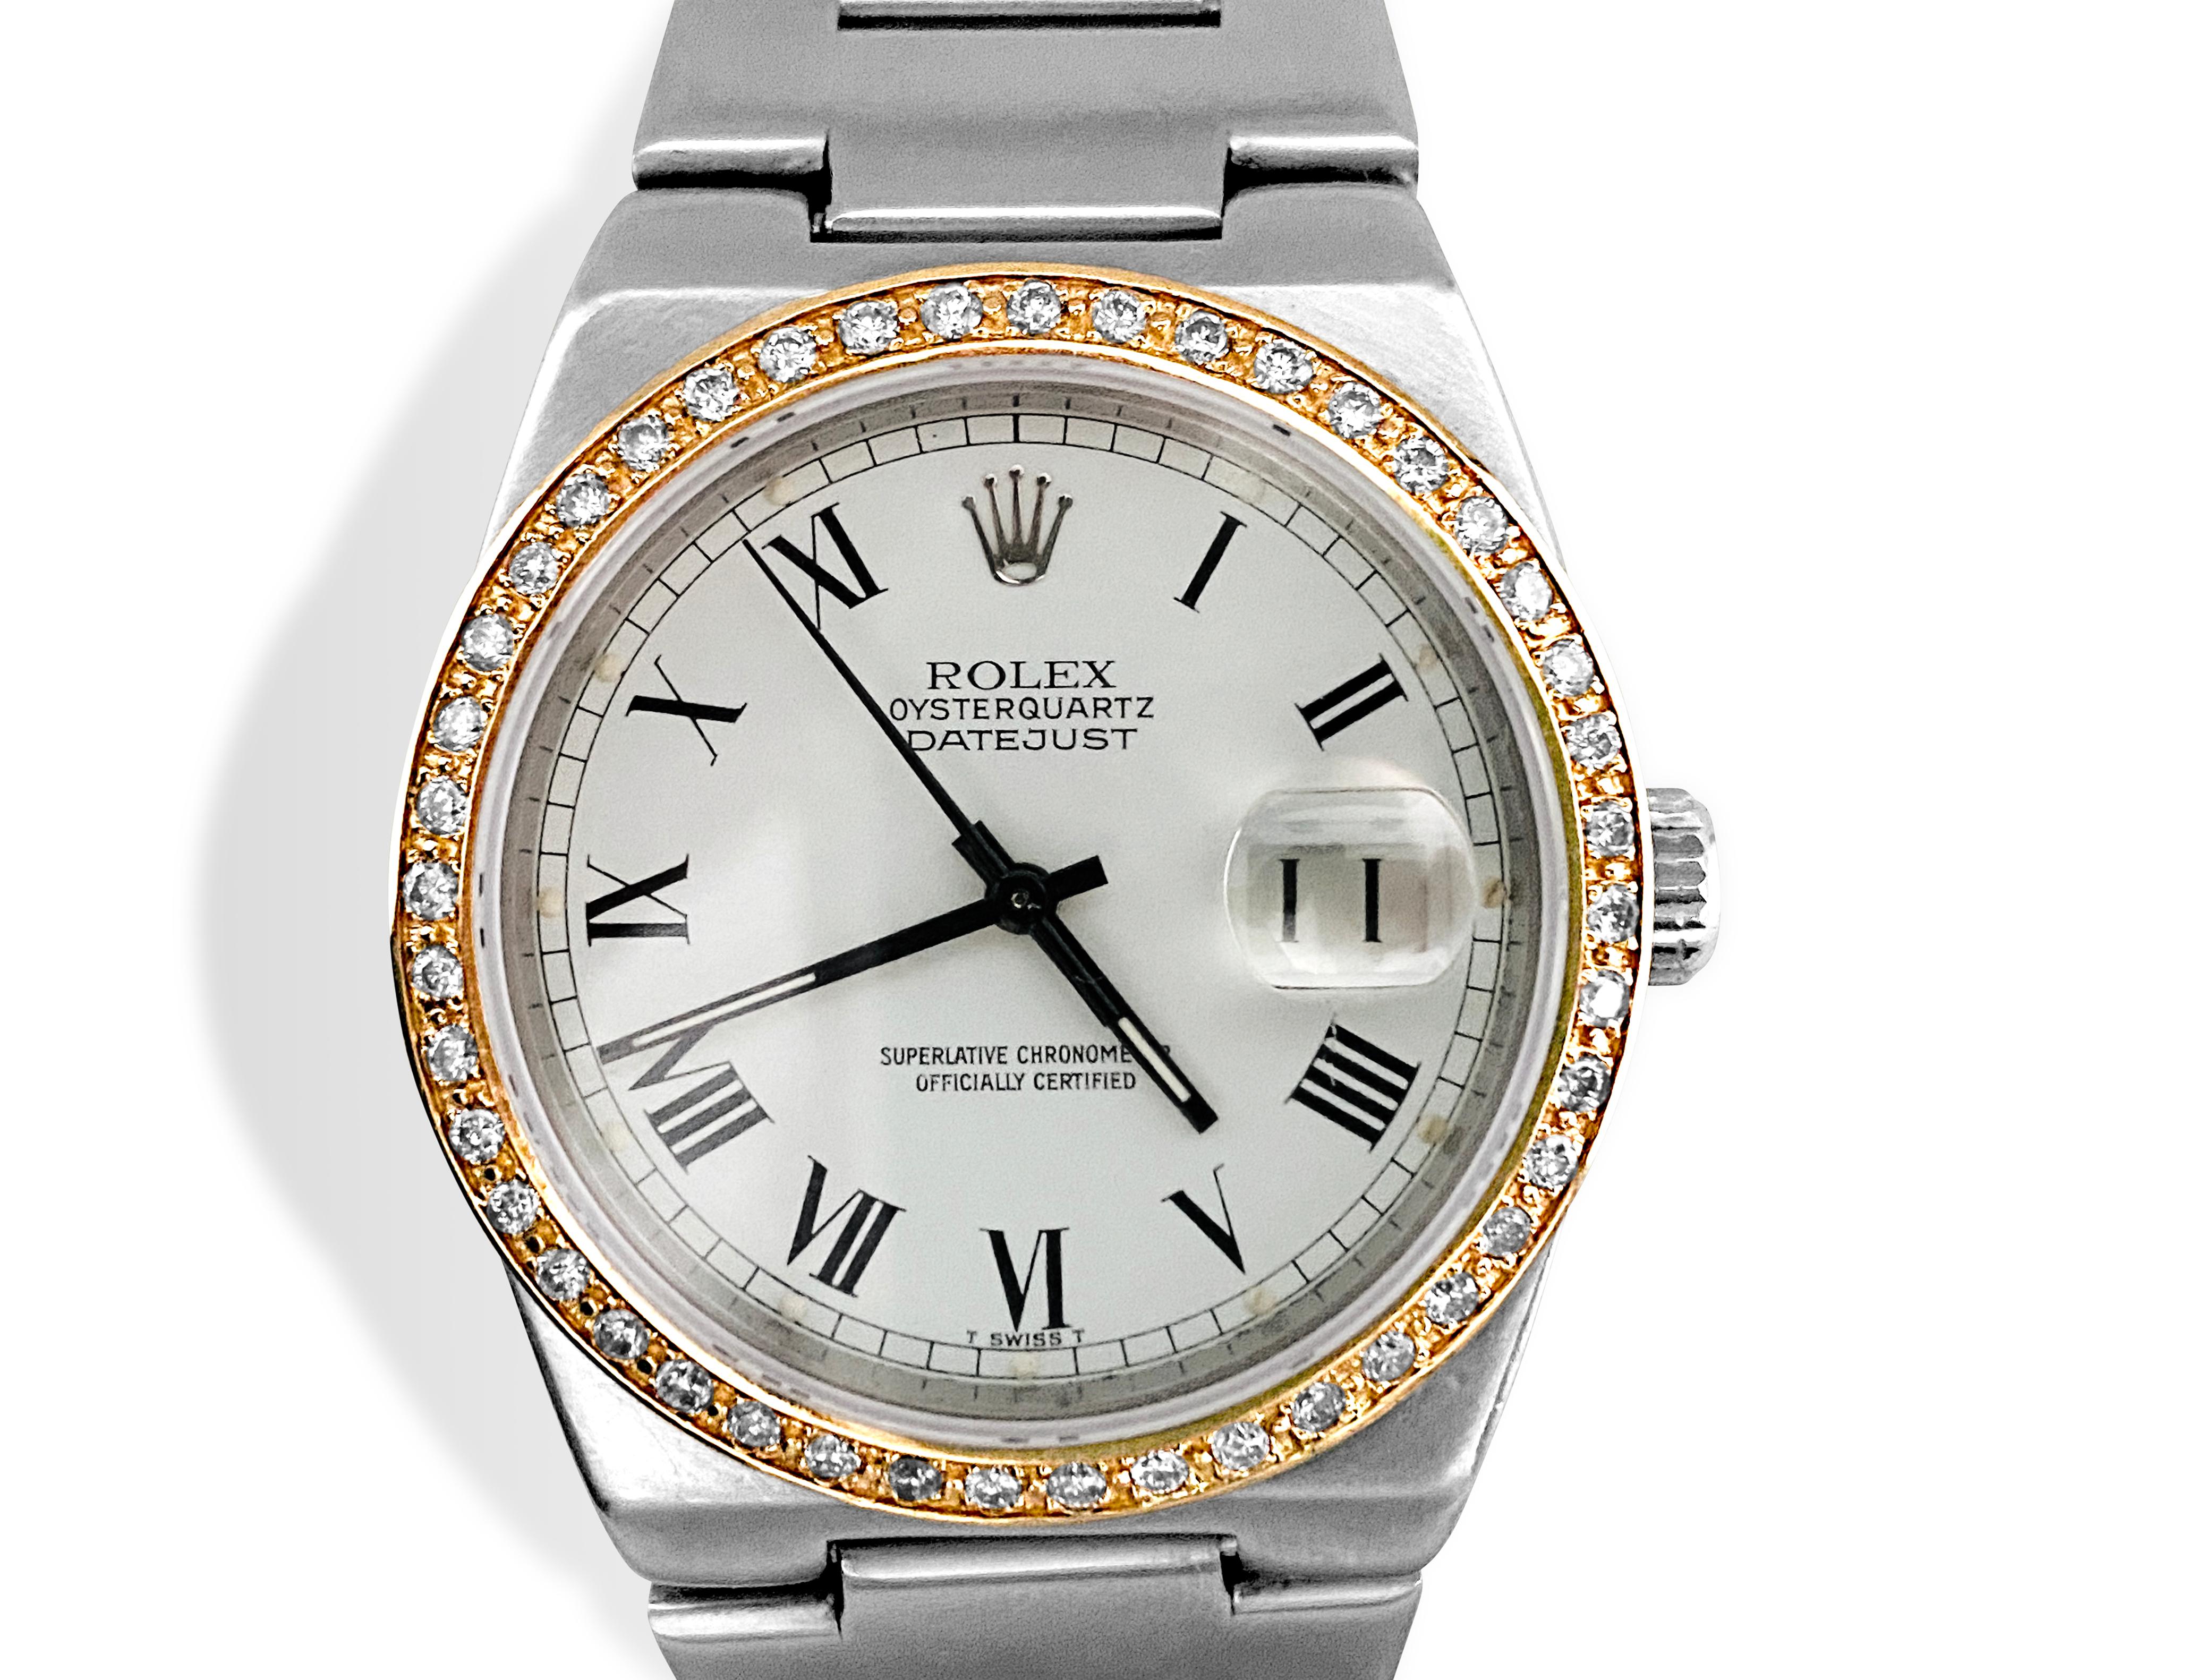 Rolex Oysterquartz Datejust 17000. Rolex Datejust Stainless Steel. 36mm case. 

Comes with Diamond Bezel. TCW of diamonds : 1.00 carat. VS2-SI1 clarity and F-G color. All stones are round brilliant cut, set in bead setting. 

For 25 years Rolex